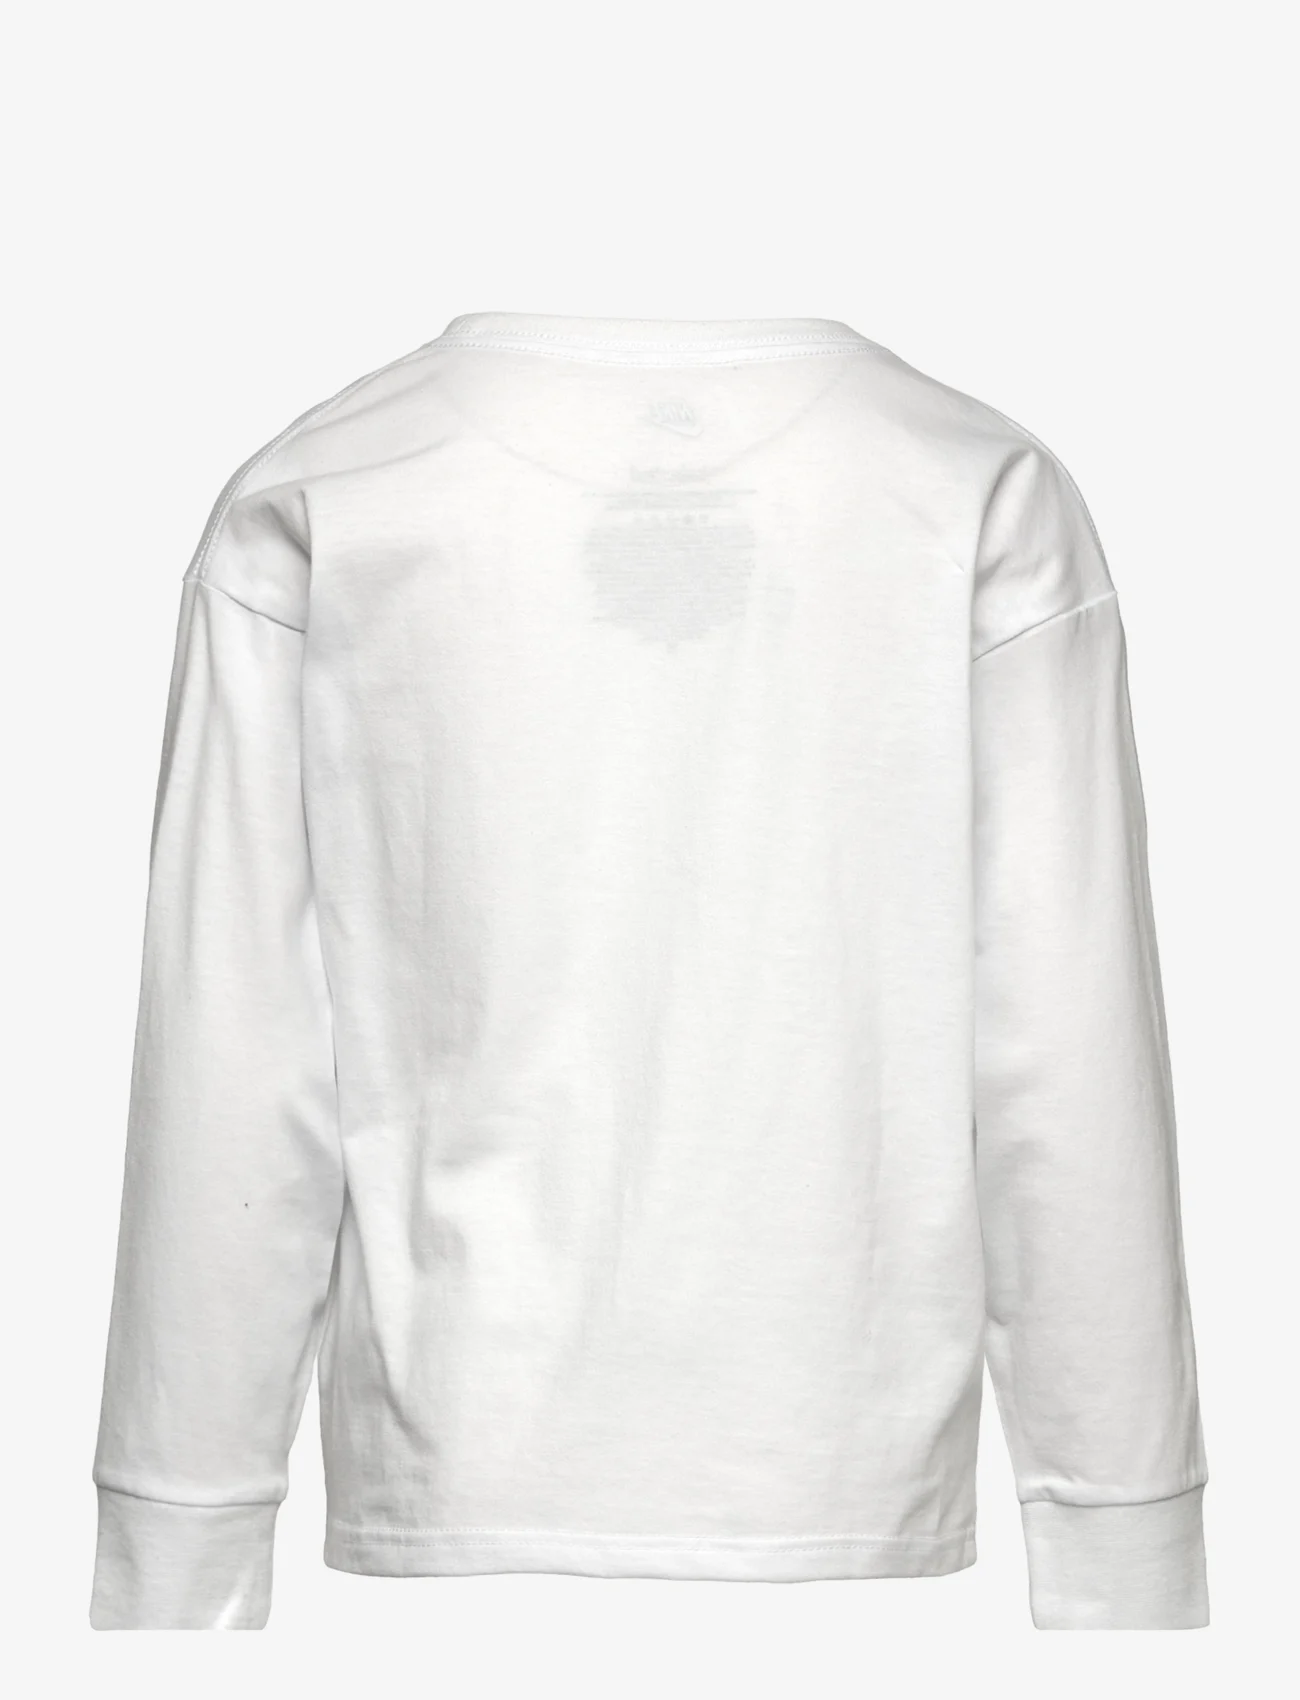 Nike - NSW RELAXED LS LBR TEE - long-sleeved t-shirts - white - 1